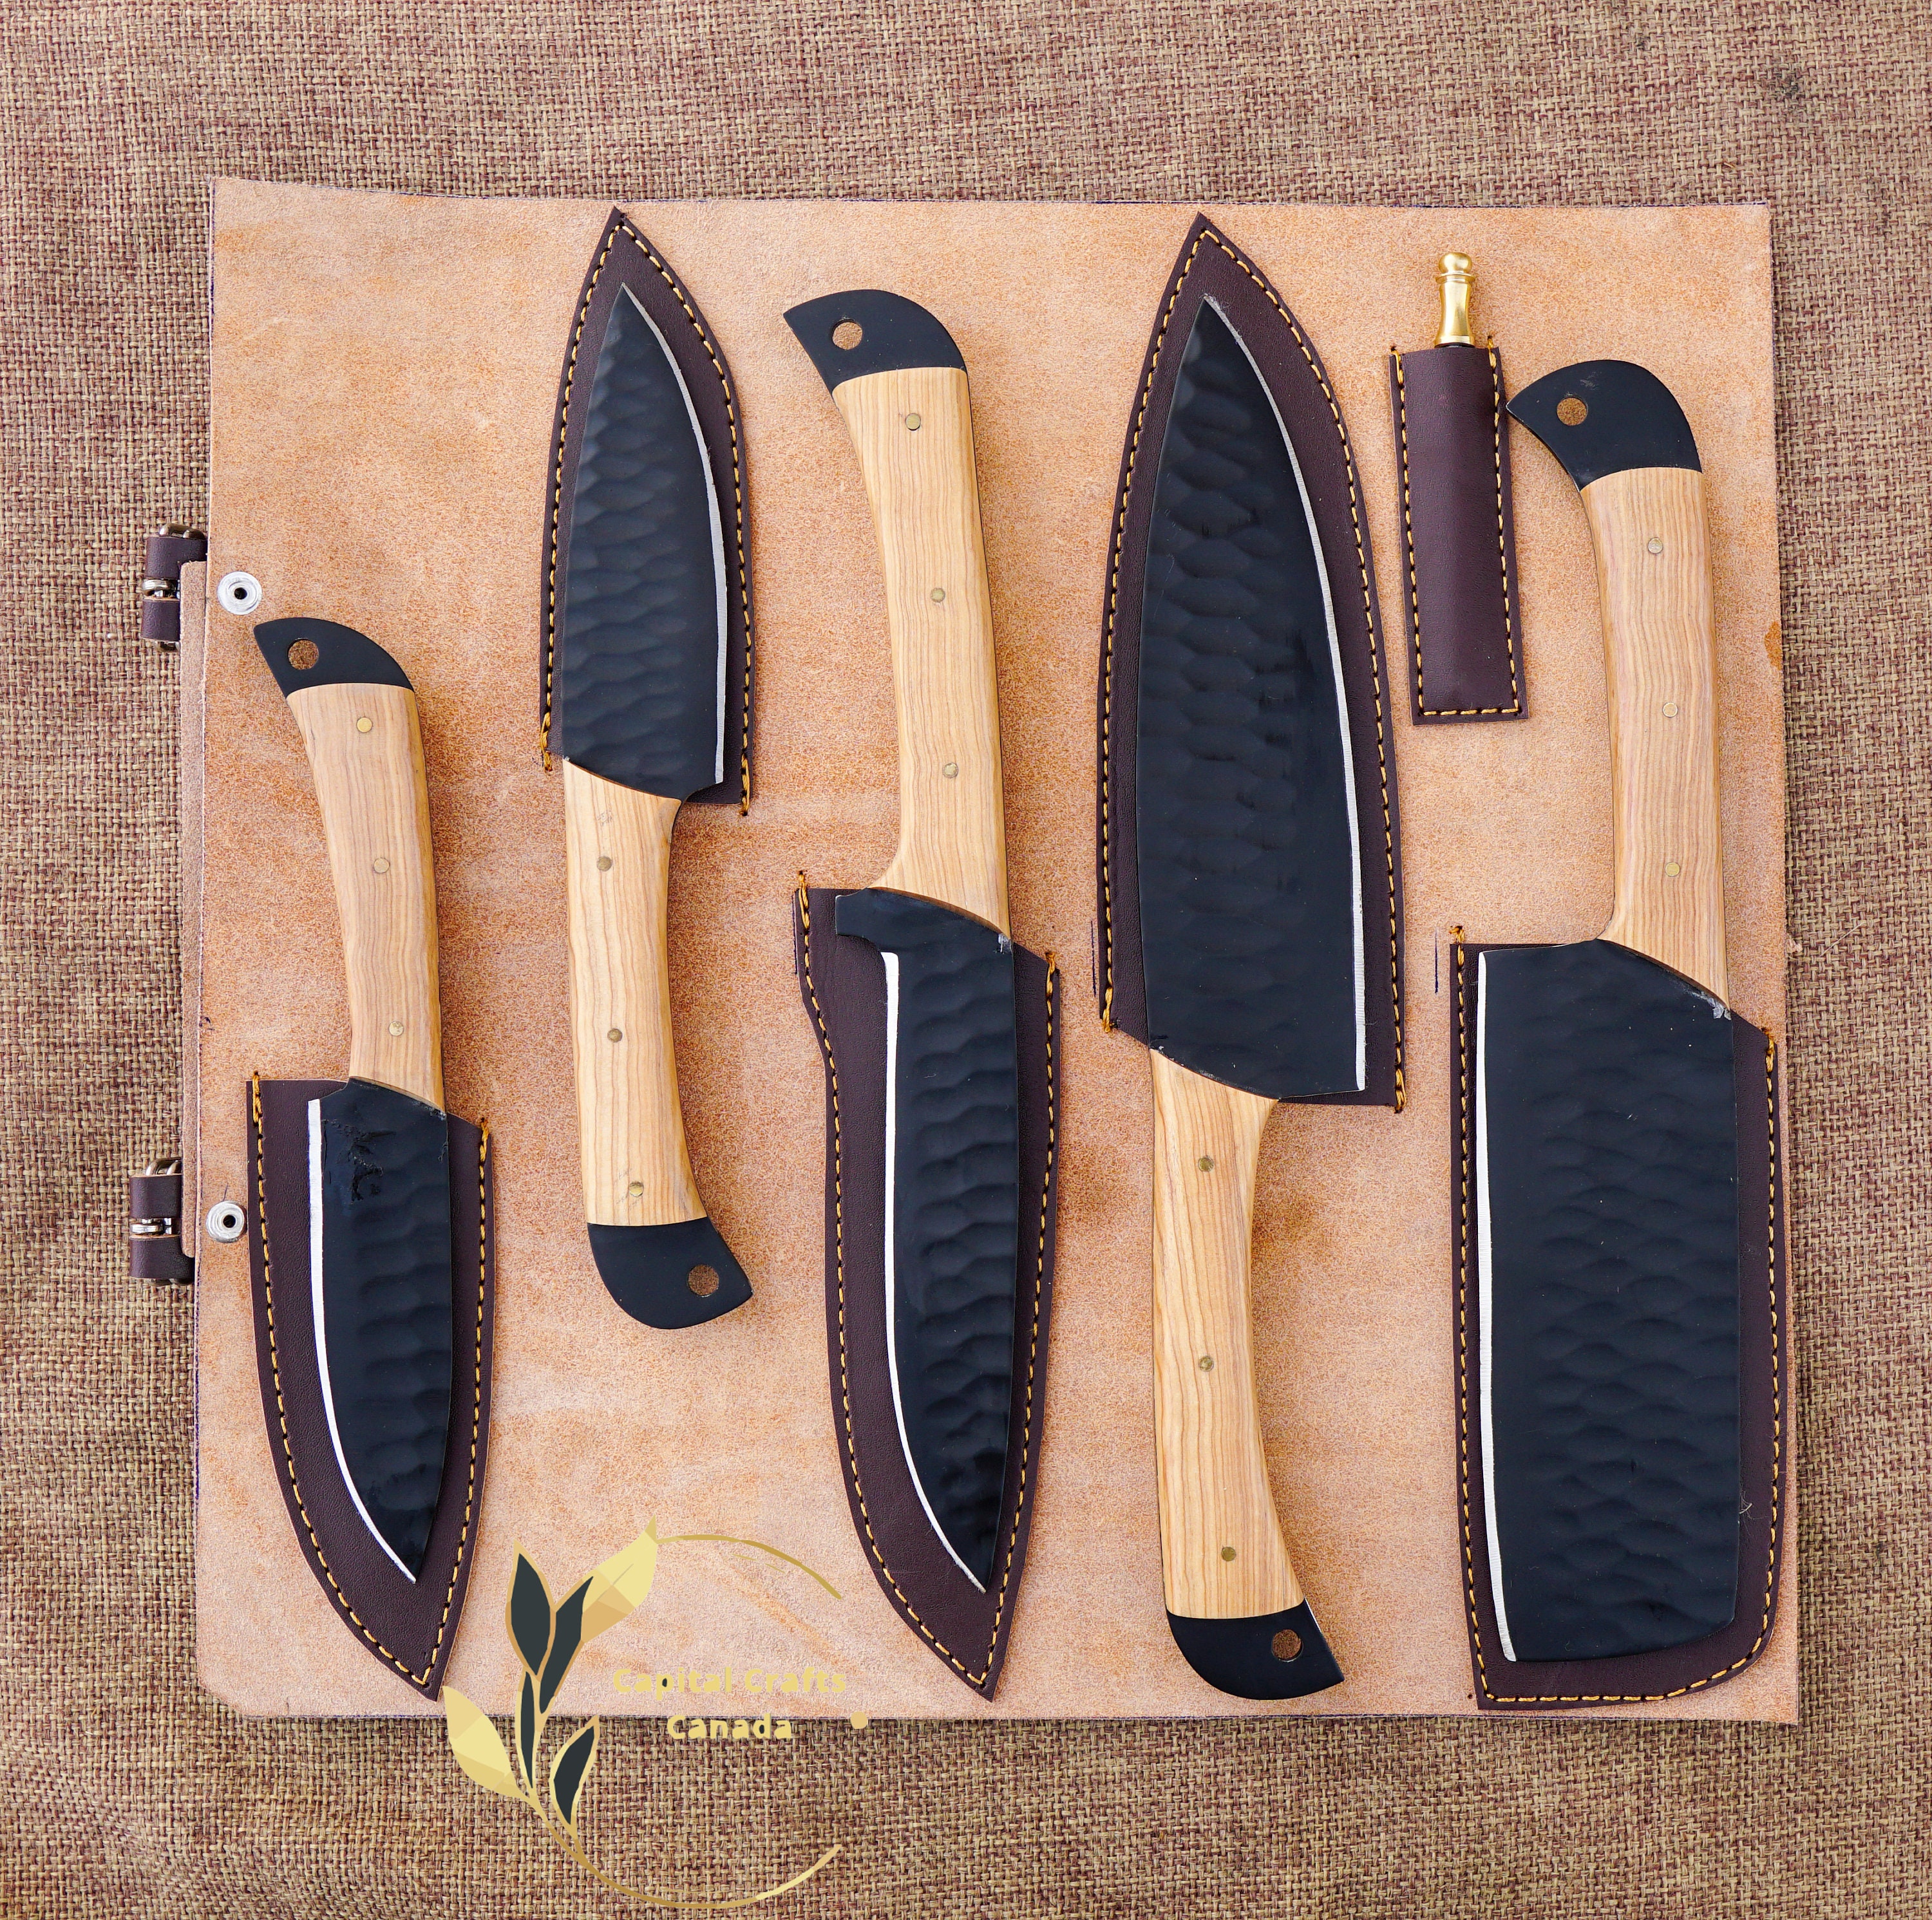  5 Pieces Damascus steel Hammered kitchen knife set, 2 tone  Yellow wood scale, 54 inches long sharp knives, Custom made hand forged  Hammered Damascus steel blade, Goat suede Roll Leather sheath